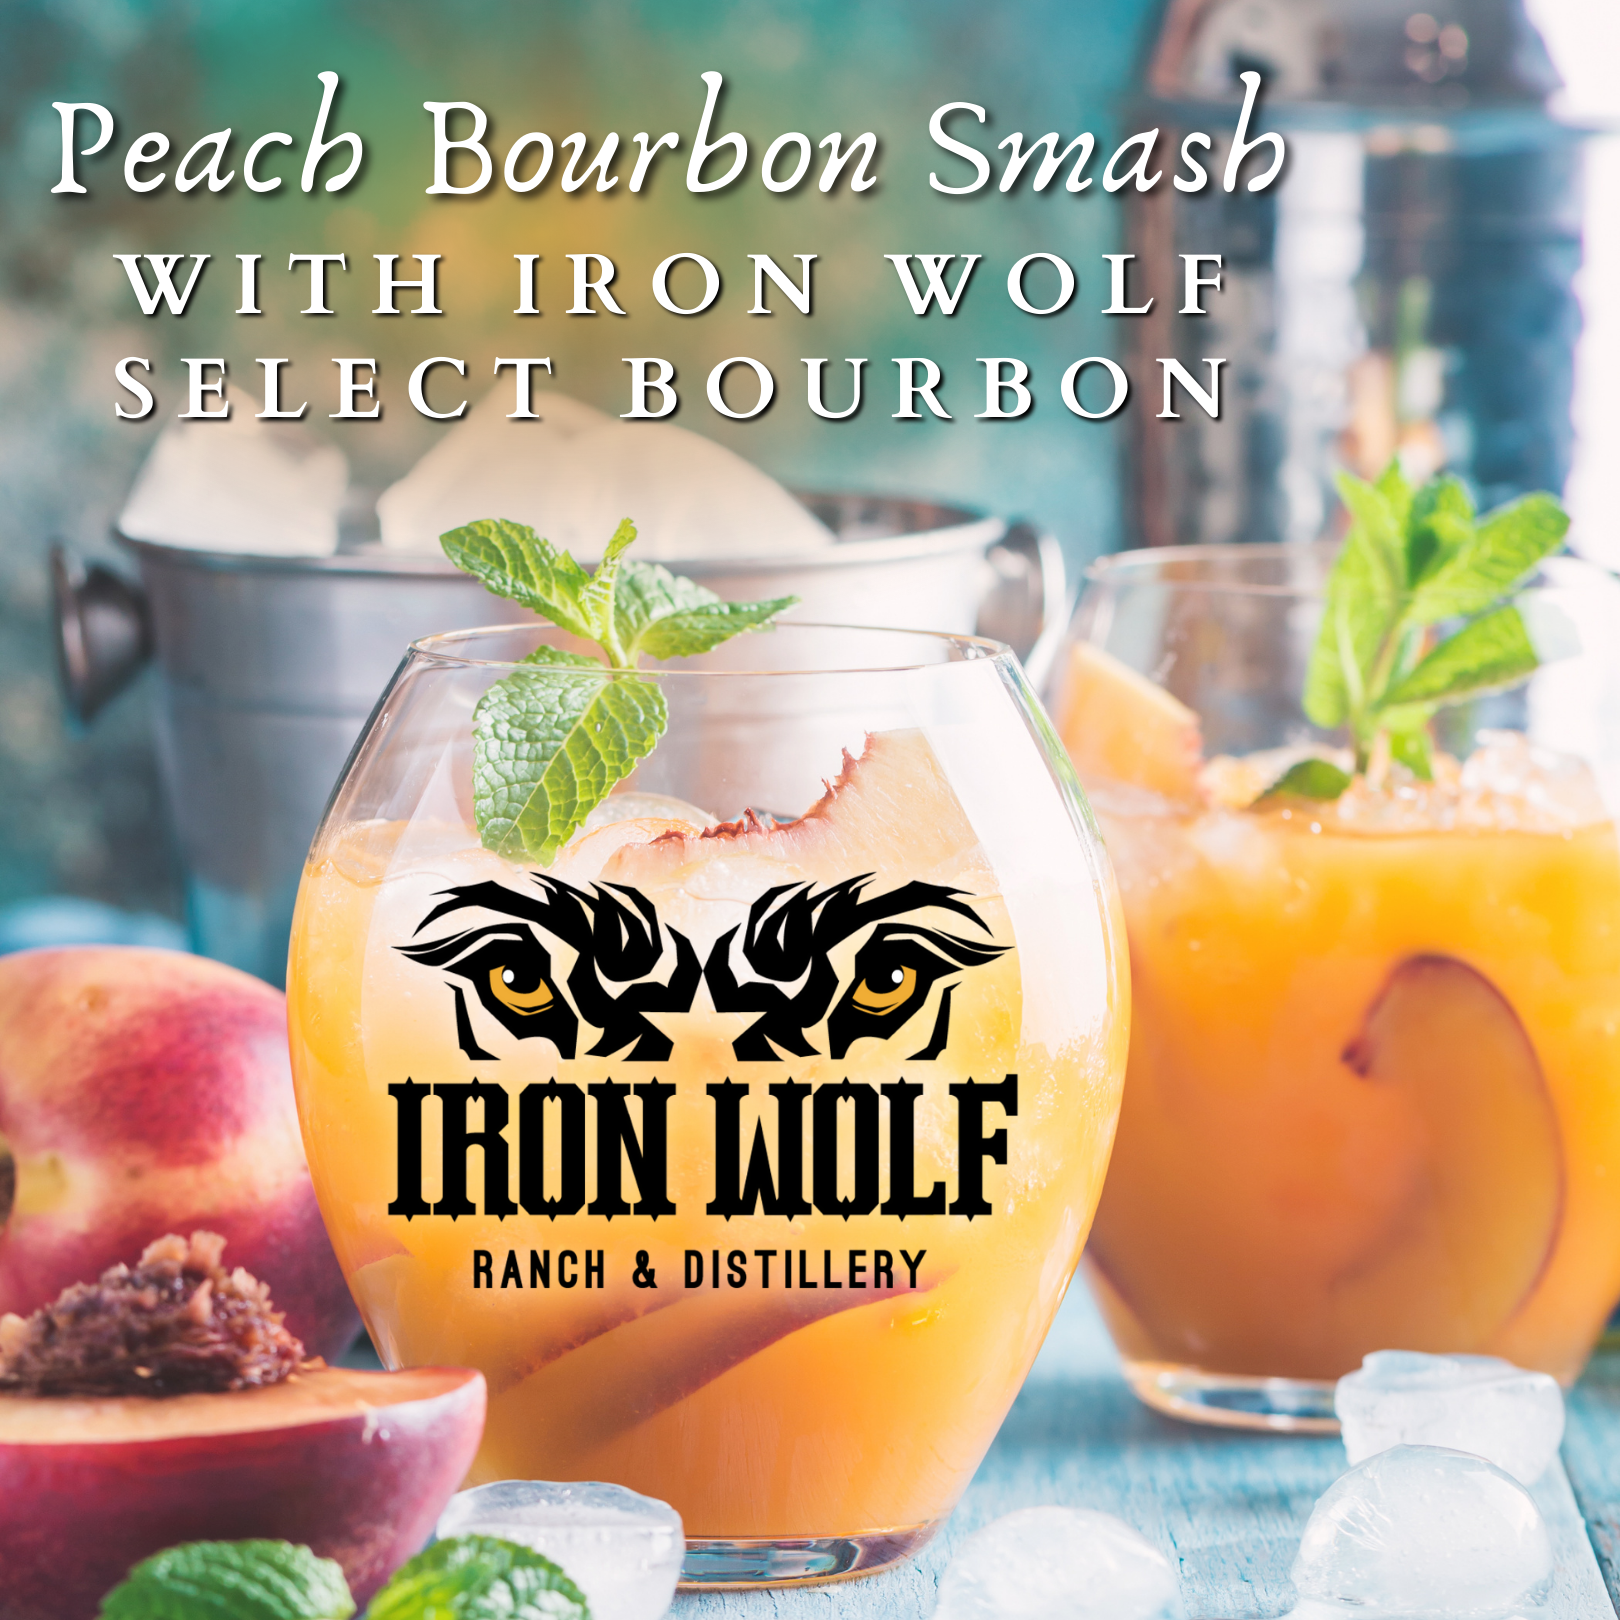 2oz Iron Wolf Select Bourbon
1oz simple syrup
1/2 of a large peach, diced
3-4 mint leaves
Ginger beer